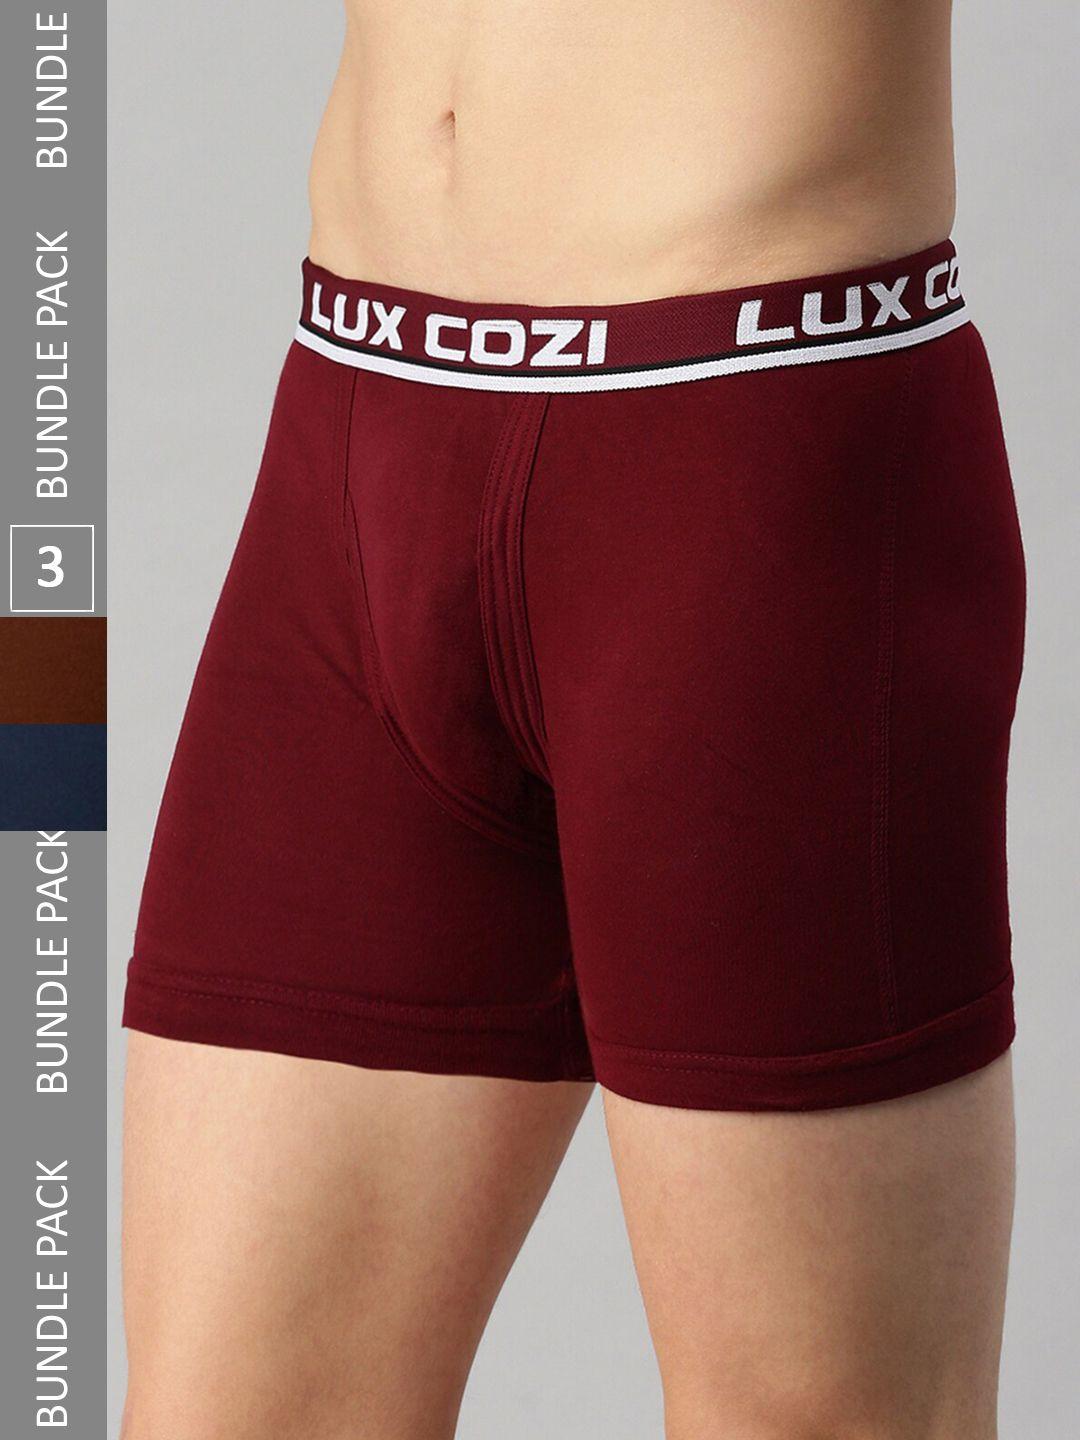 lux cozi men pack of 3 cotton blend outer elastic trunks